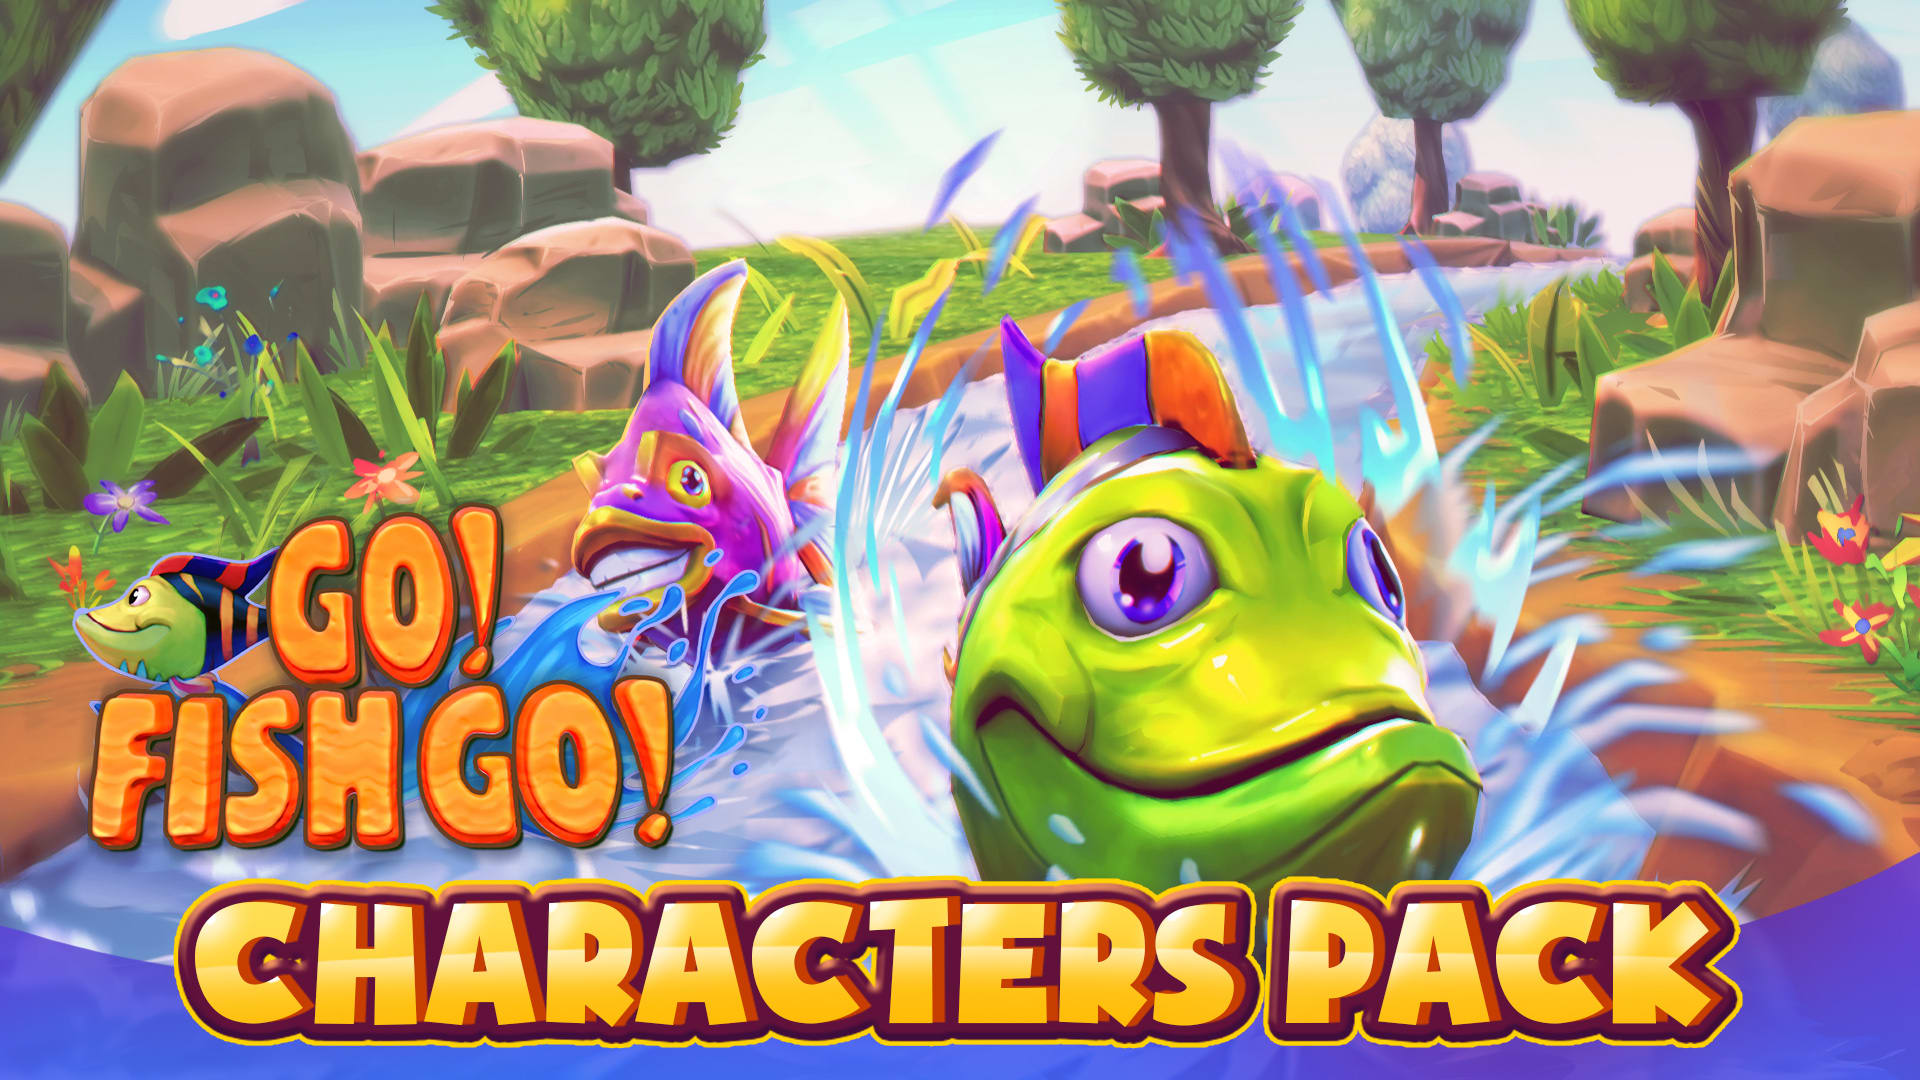 Go! Fish Go! Characters pack